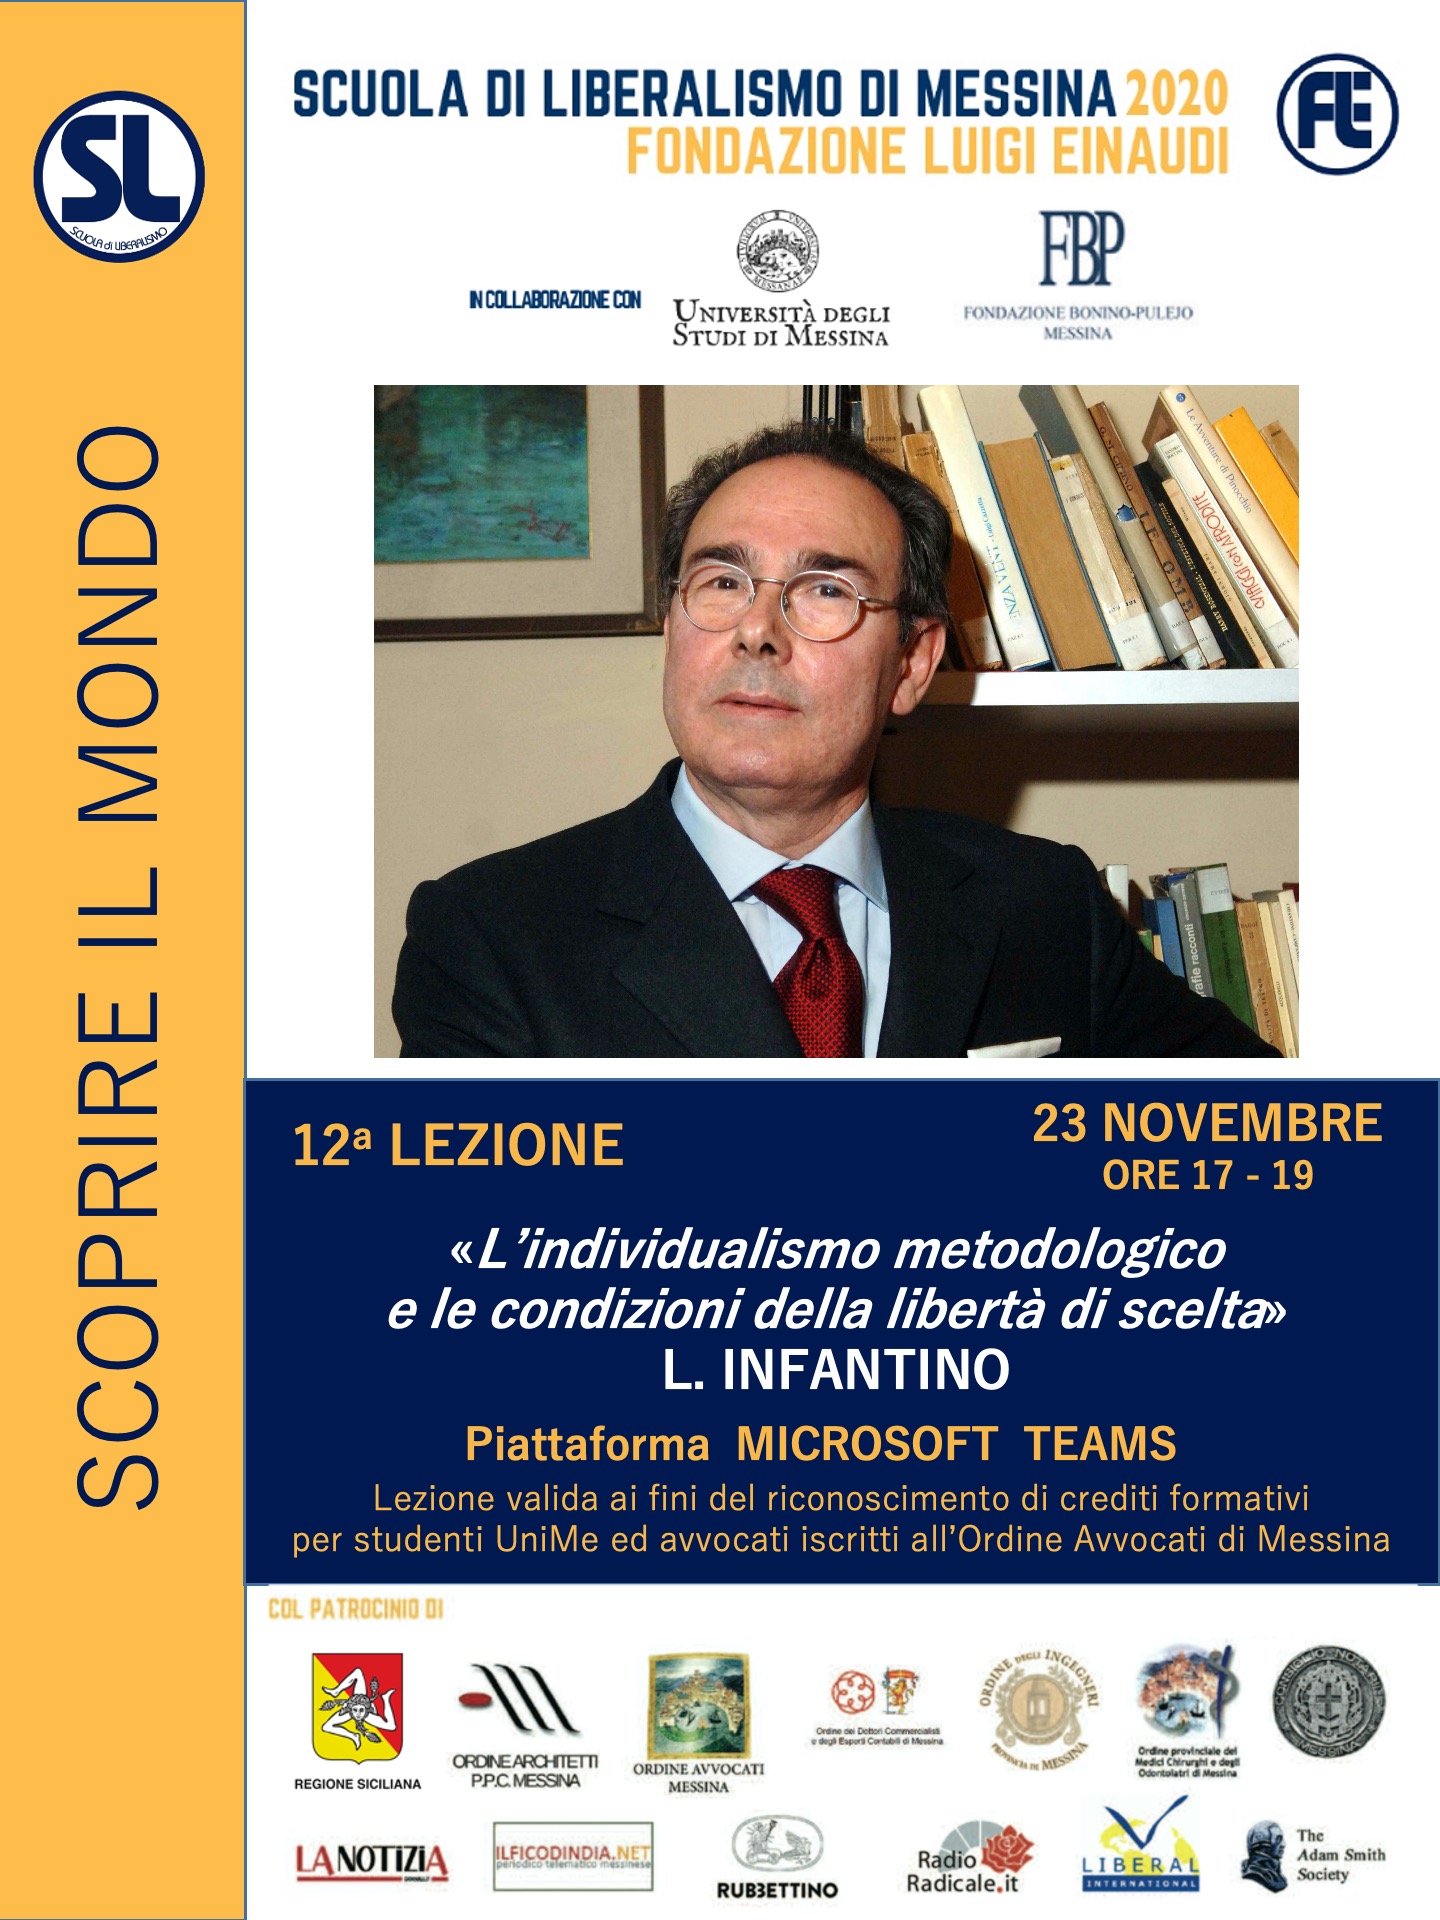 Messina, November 23, 2020. School of Liberalism: Lorenzo Infantino gives the lecture